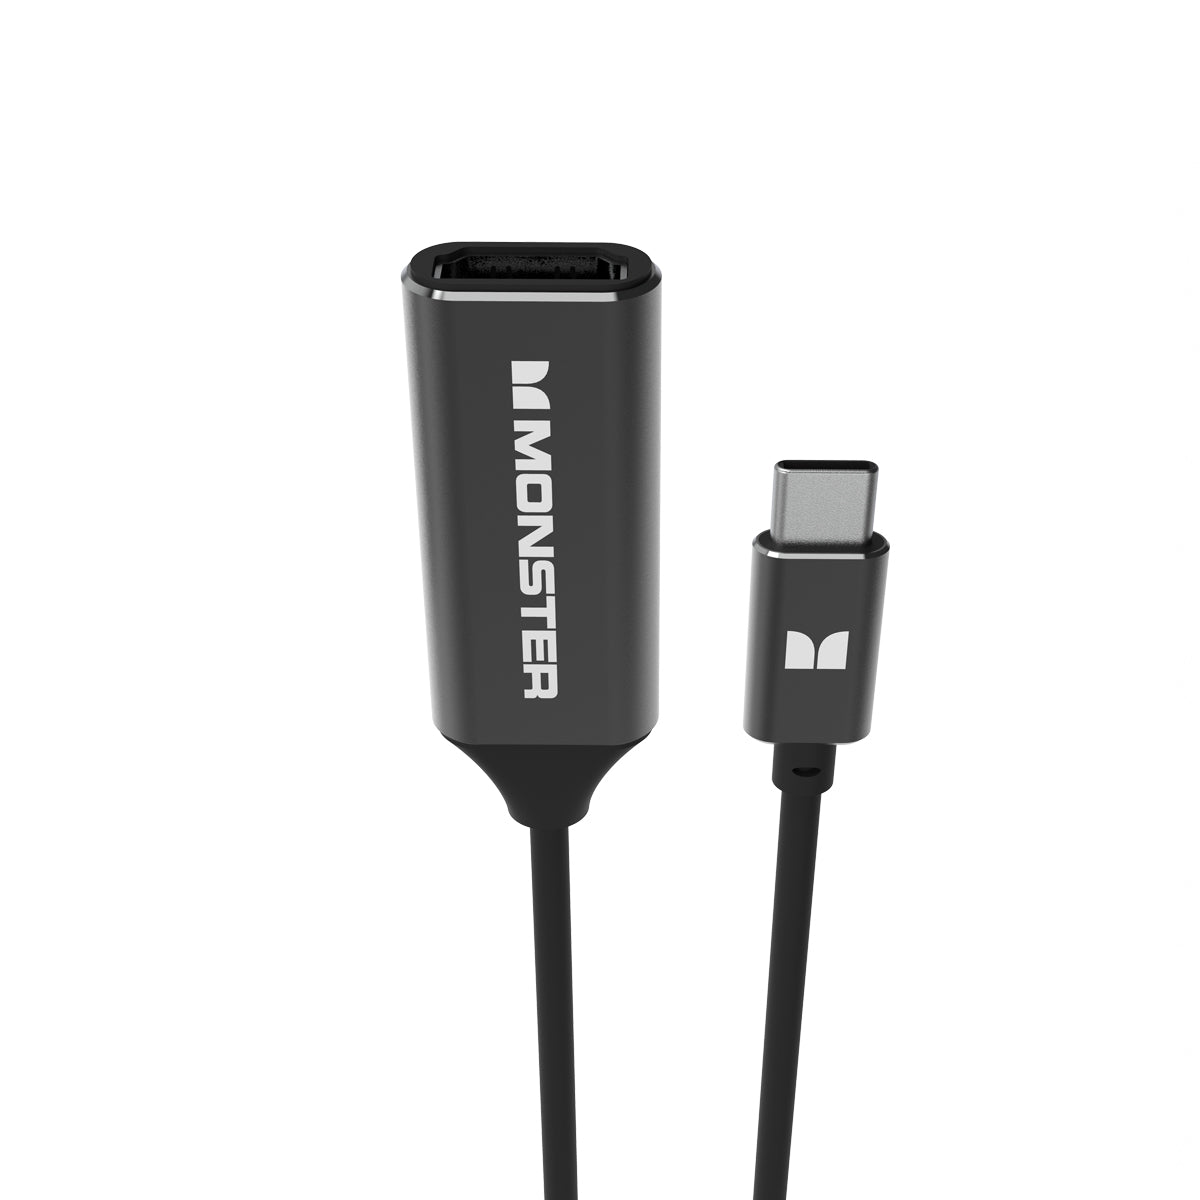 Monster - Essentials USB-C to HDMI Adapter (Black)